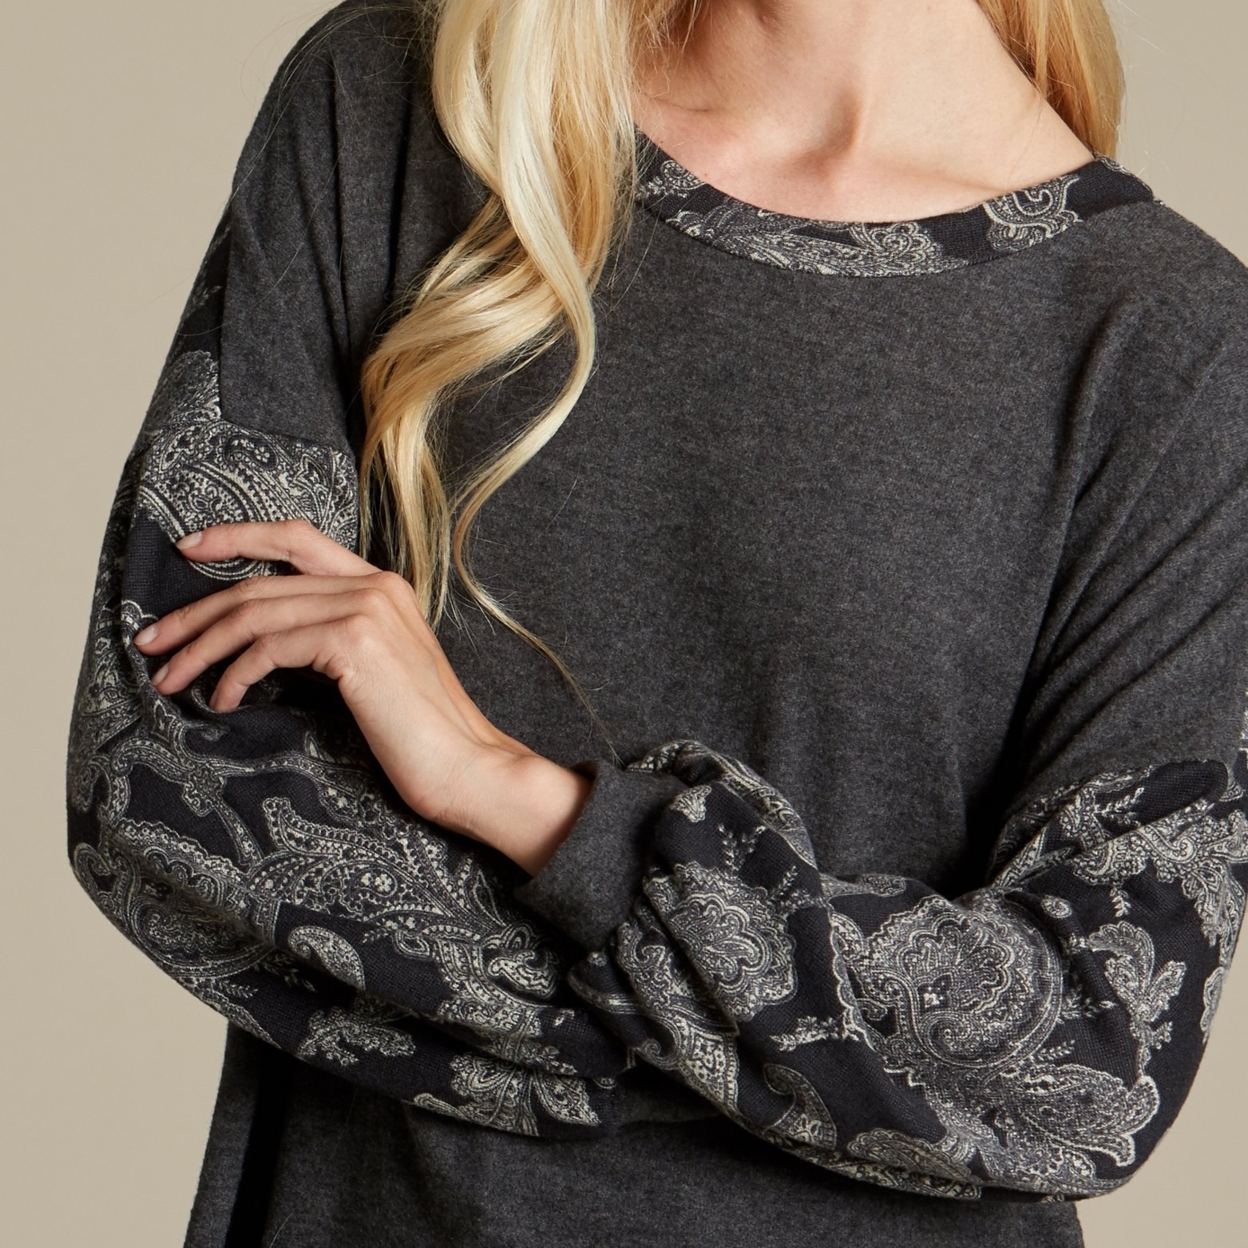 Brushed Cashmere Sweater - Charcoal, Small (2-6)